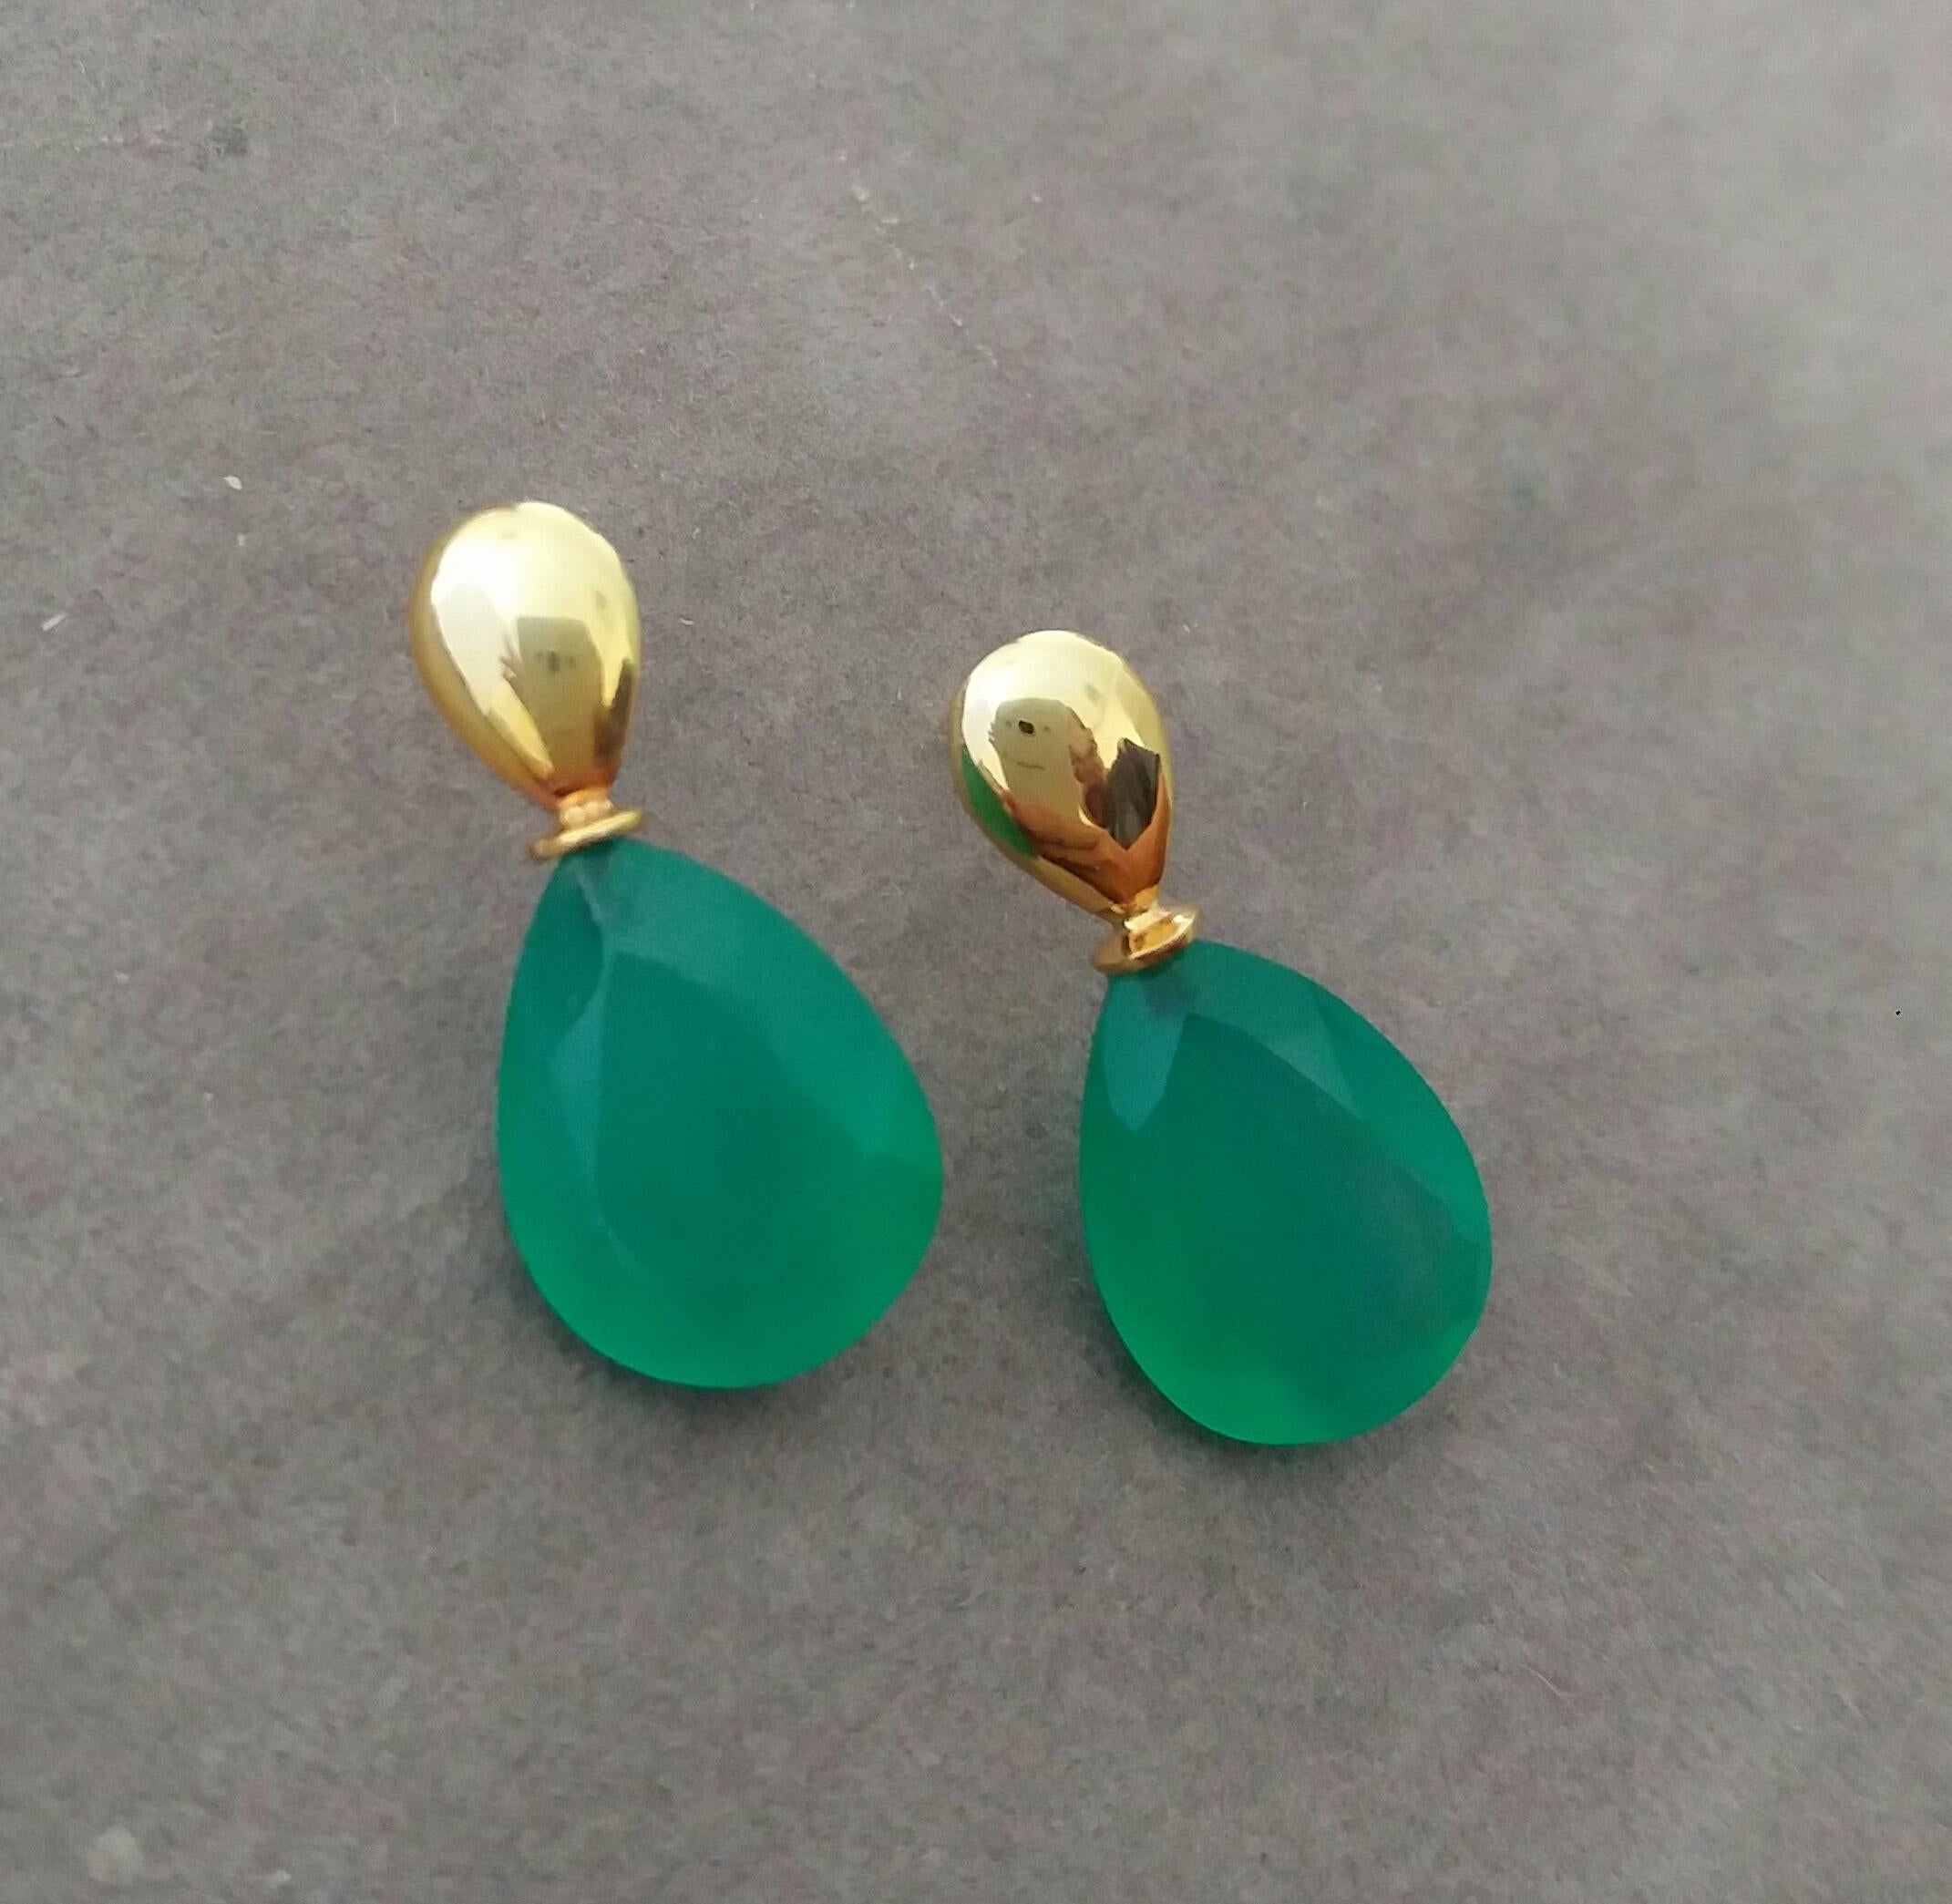 Pear Cut 13 Carats Faceted Pear Shape Natural Green Onyx 14 Kt Gold Top Stud Earrings For Sale